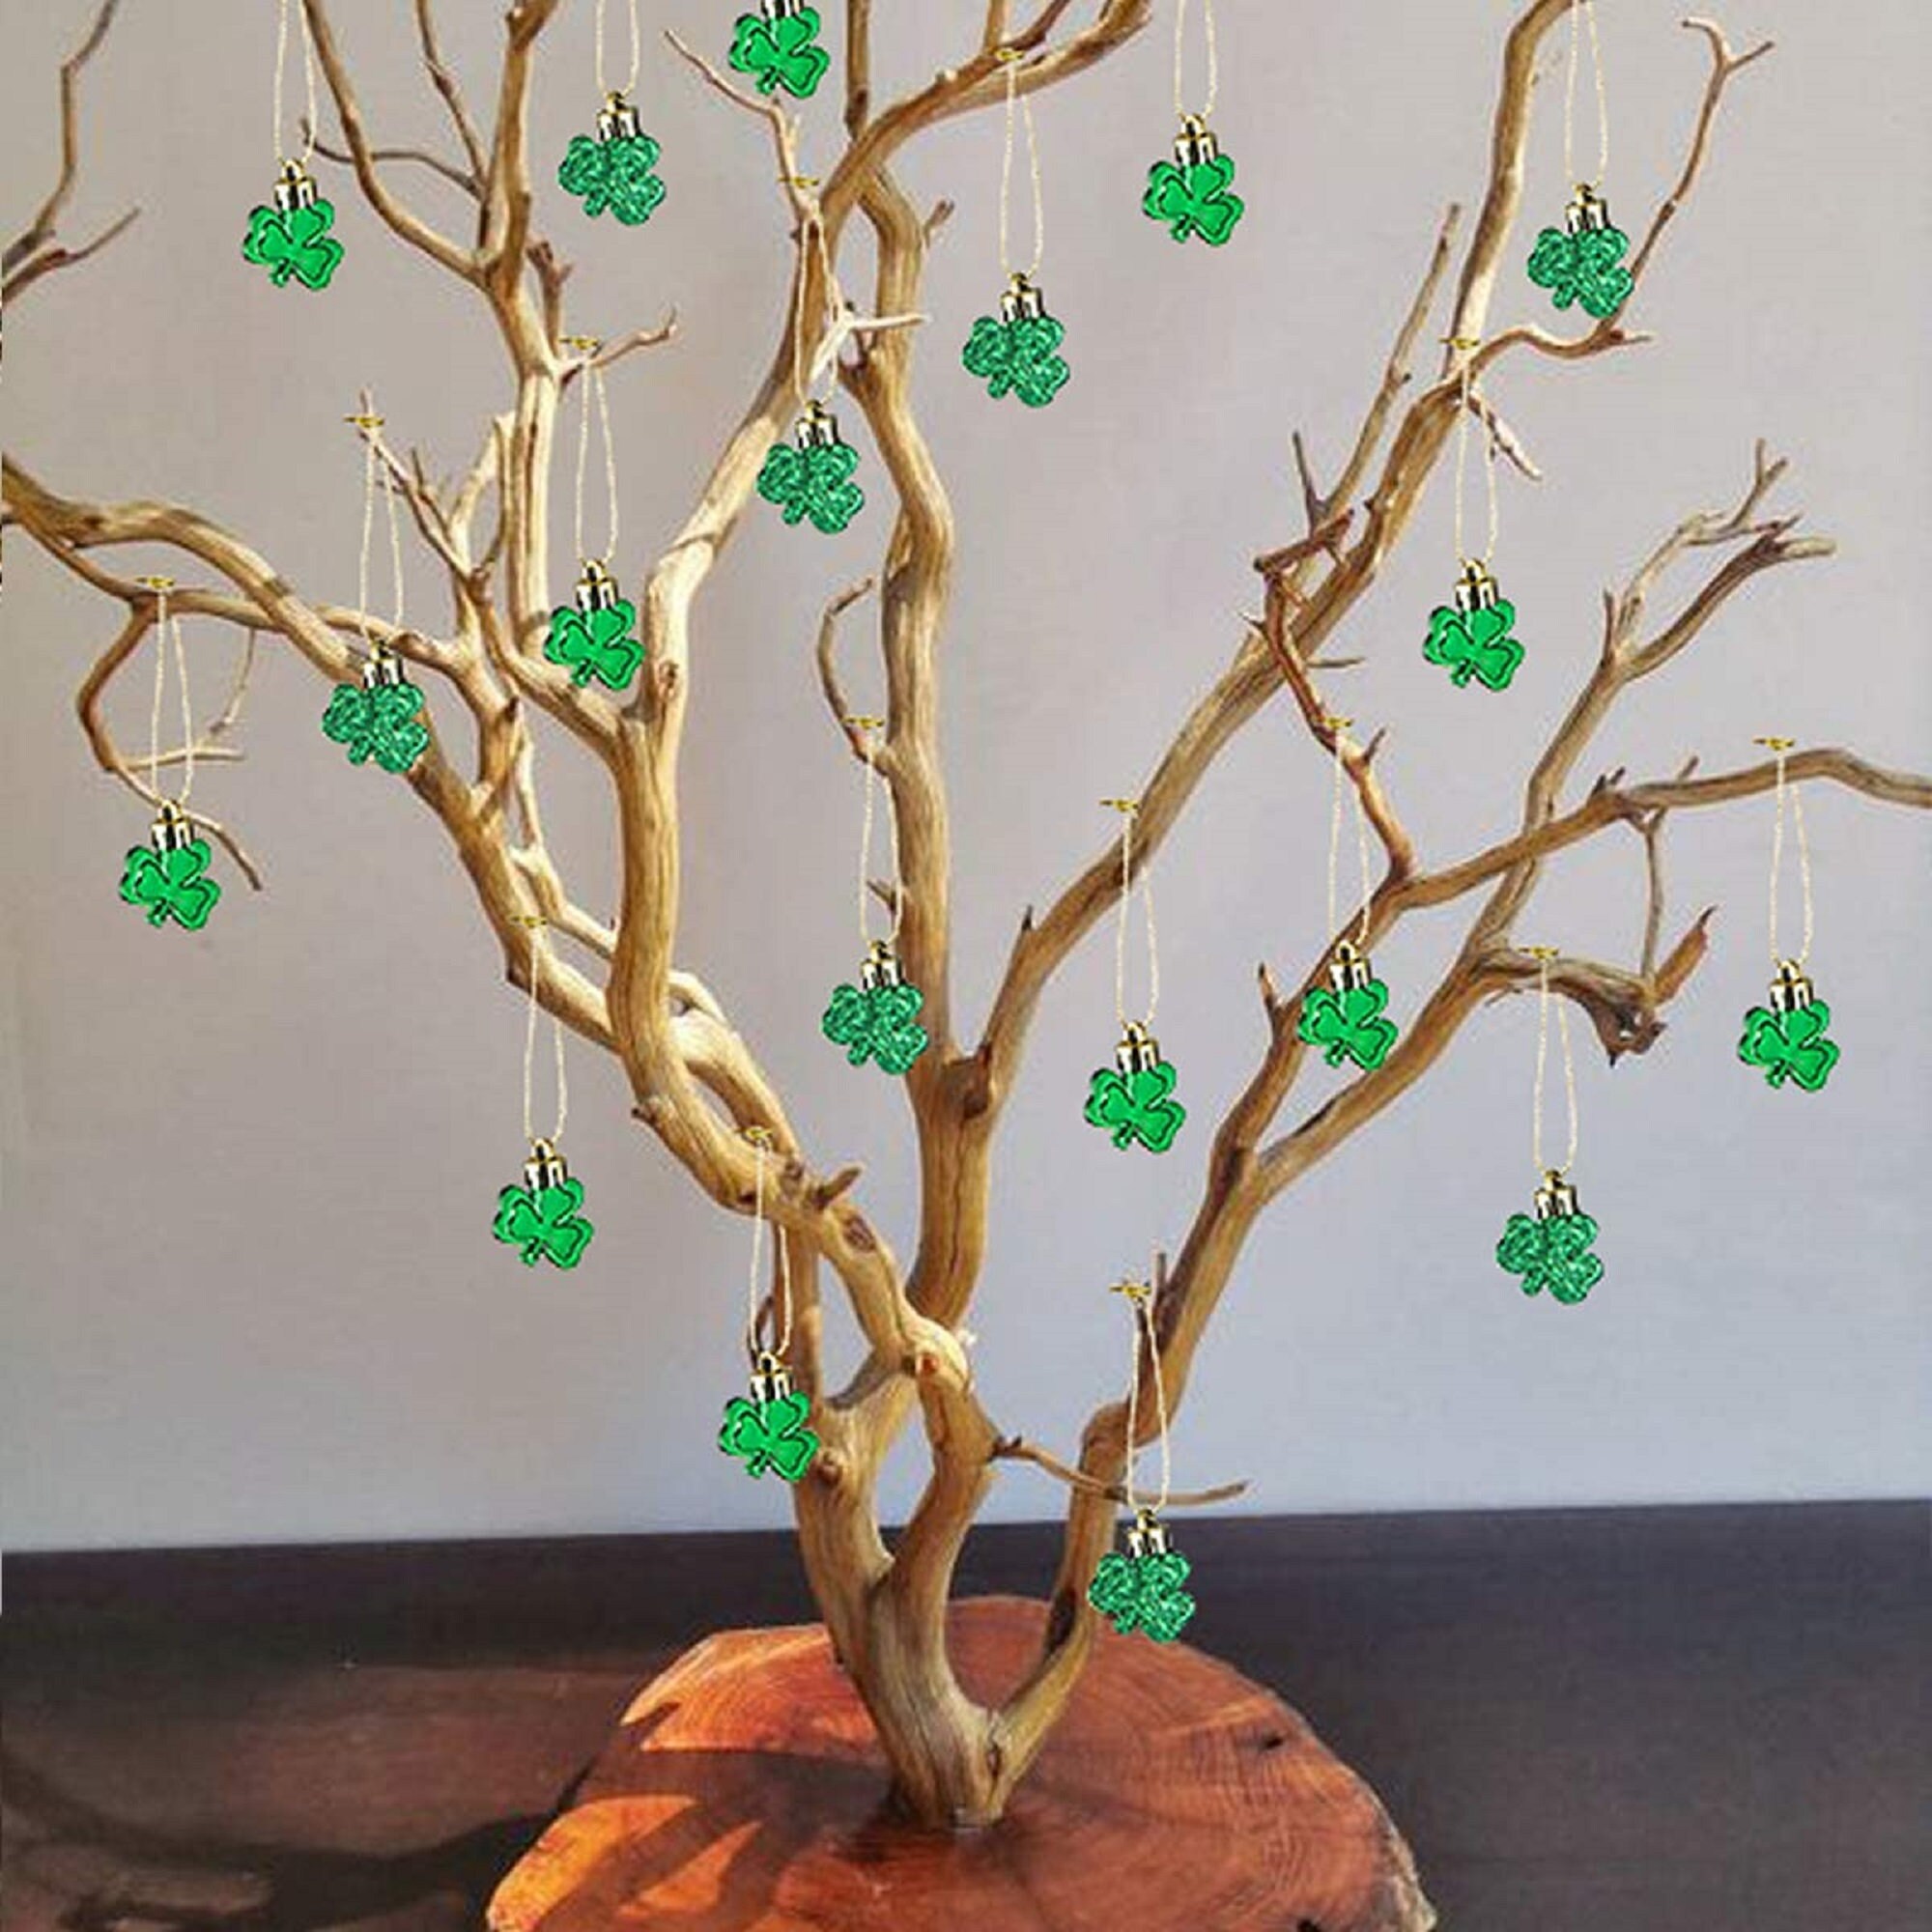 36 Pieces St Patricks Day Shamrocks Ornament Good Luck Clover Hanging Bauble for Tree Baubles Table Shelf Festival Decorations